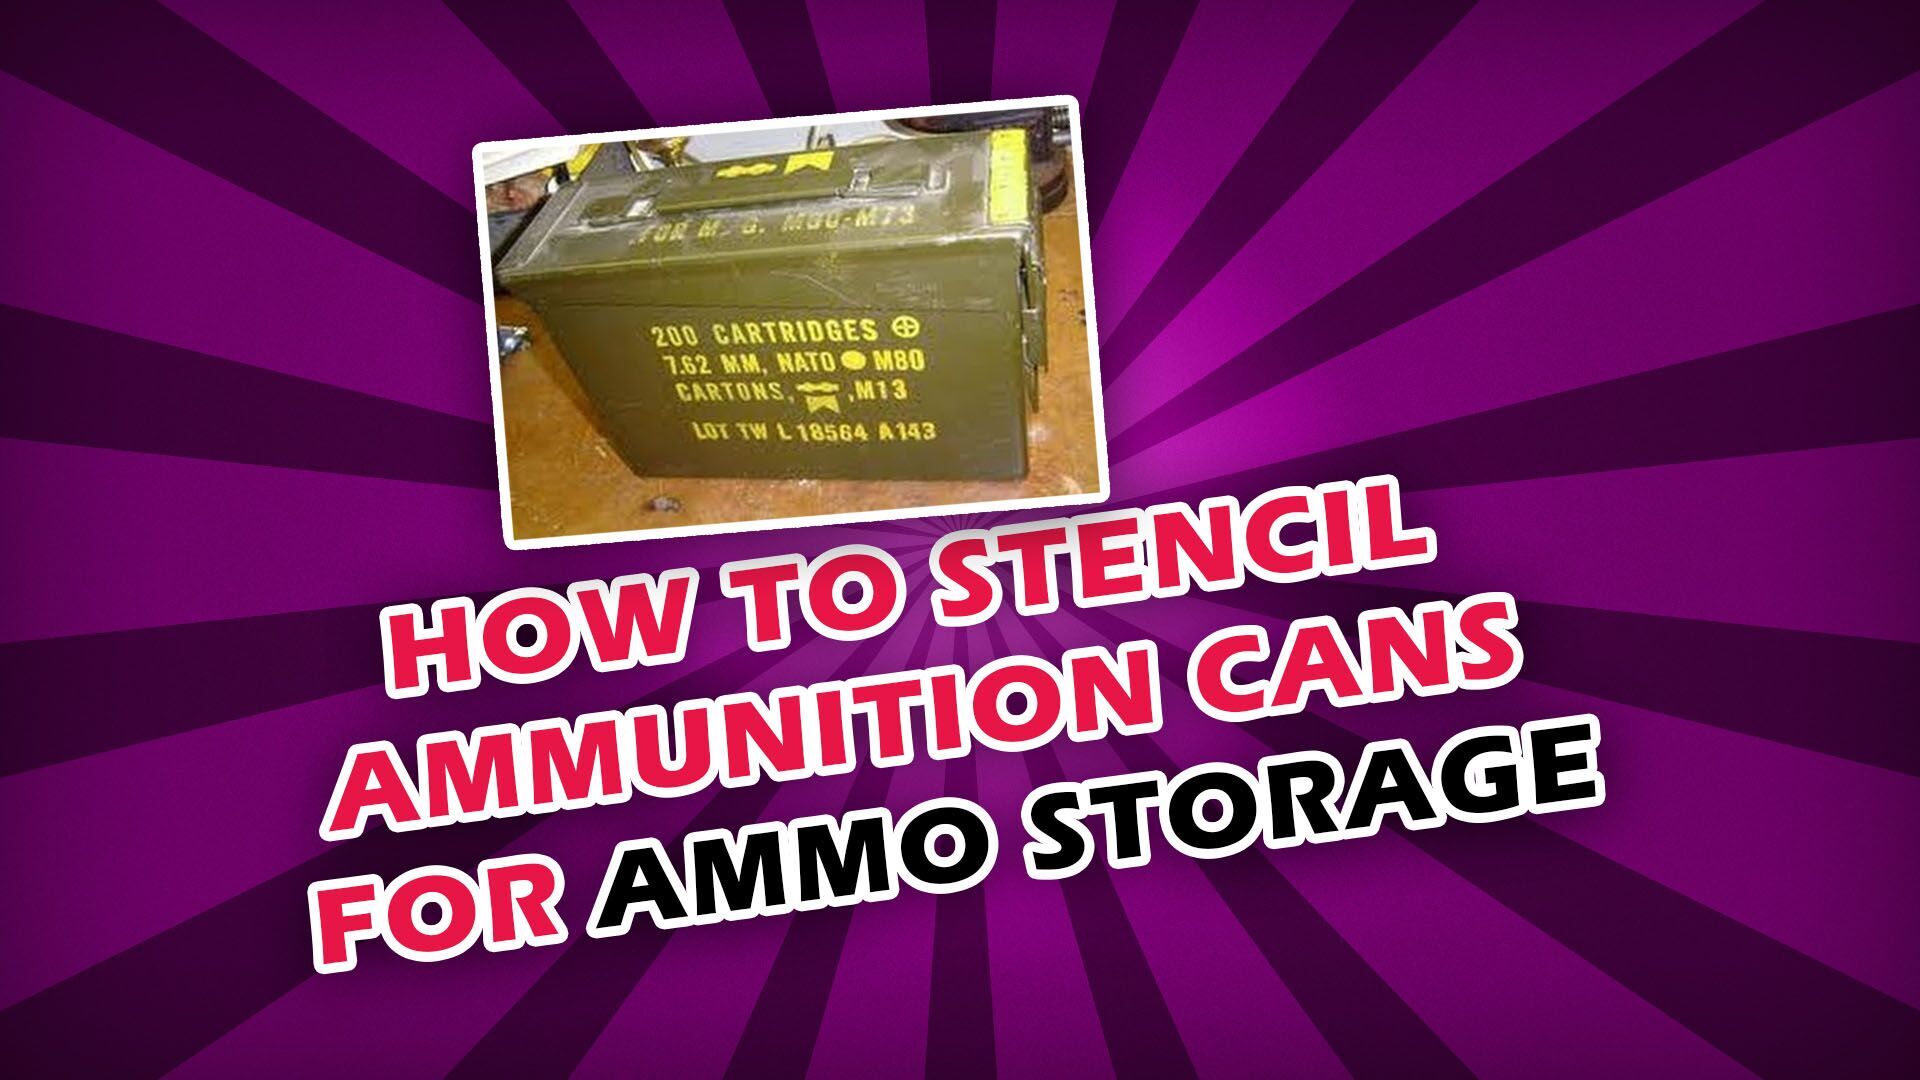 How to Stencil Ammunition Cans for Ammo Storage